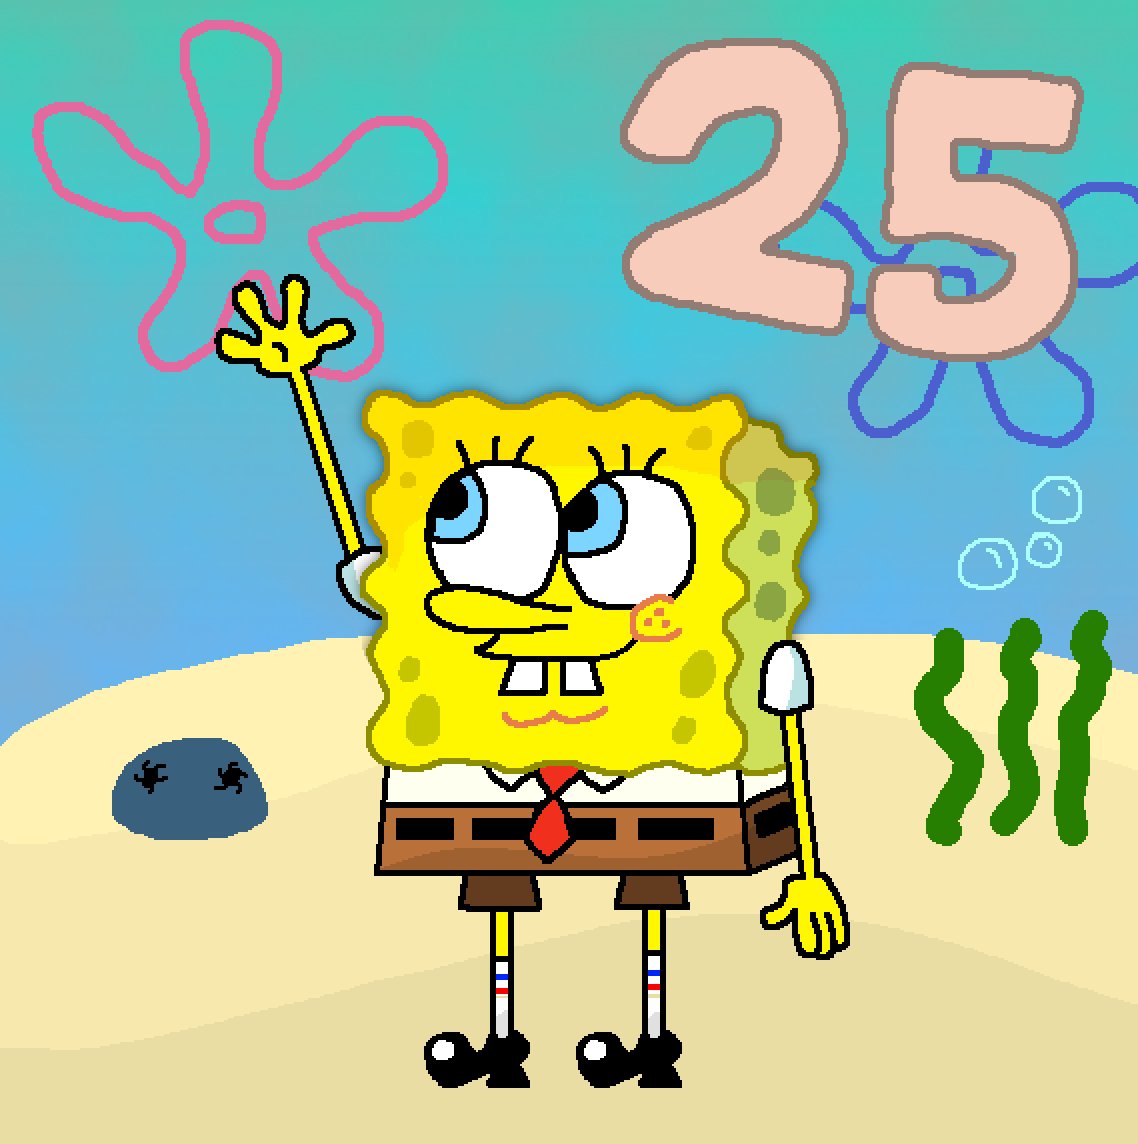 First time I've drawn the sponge. How'd I do?

#25YearsOfSpongeBob